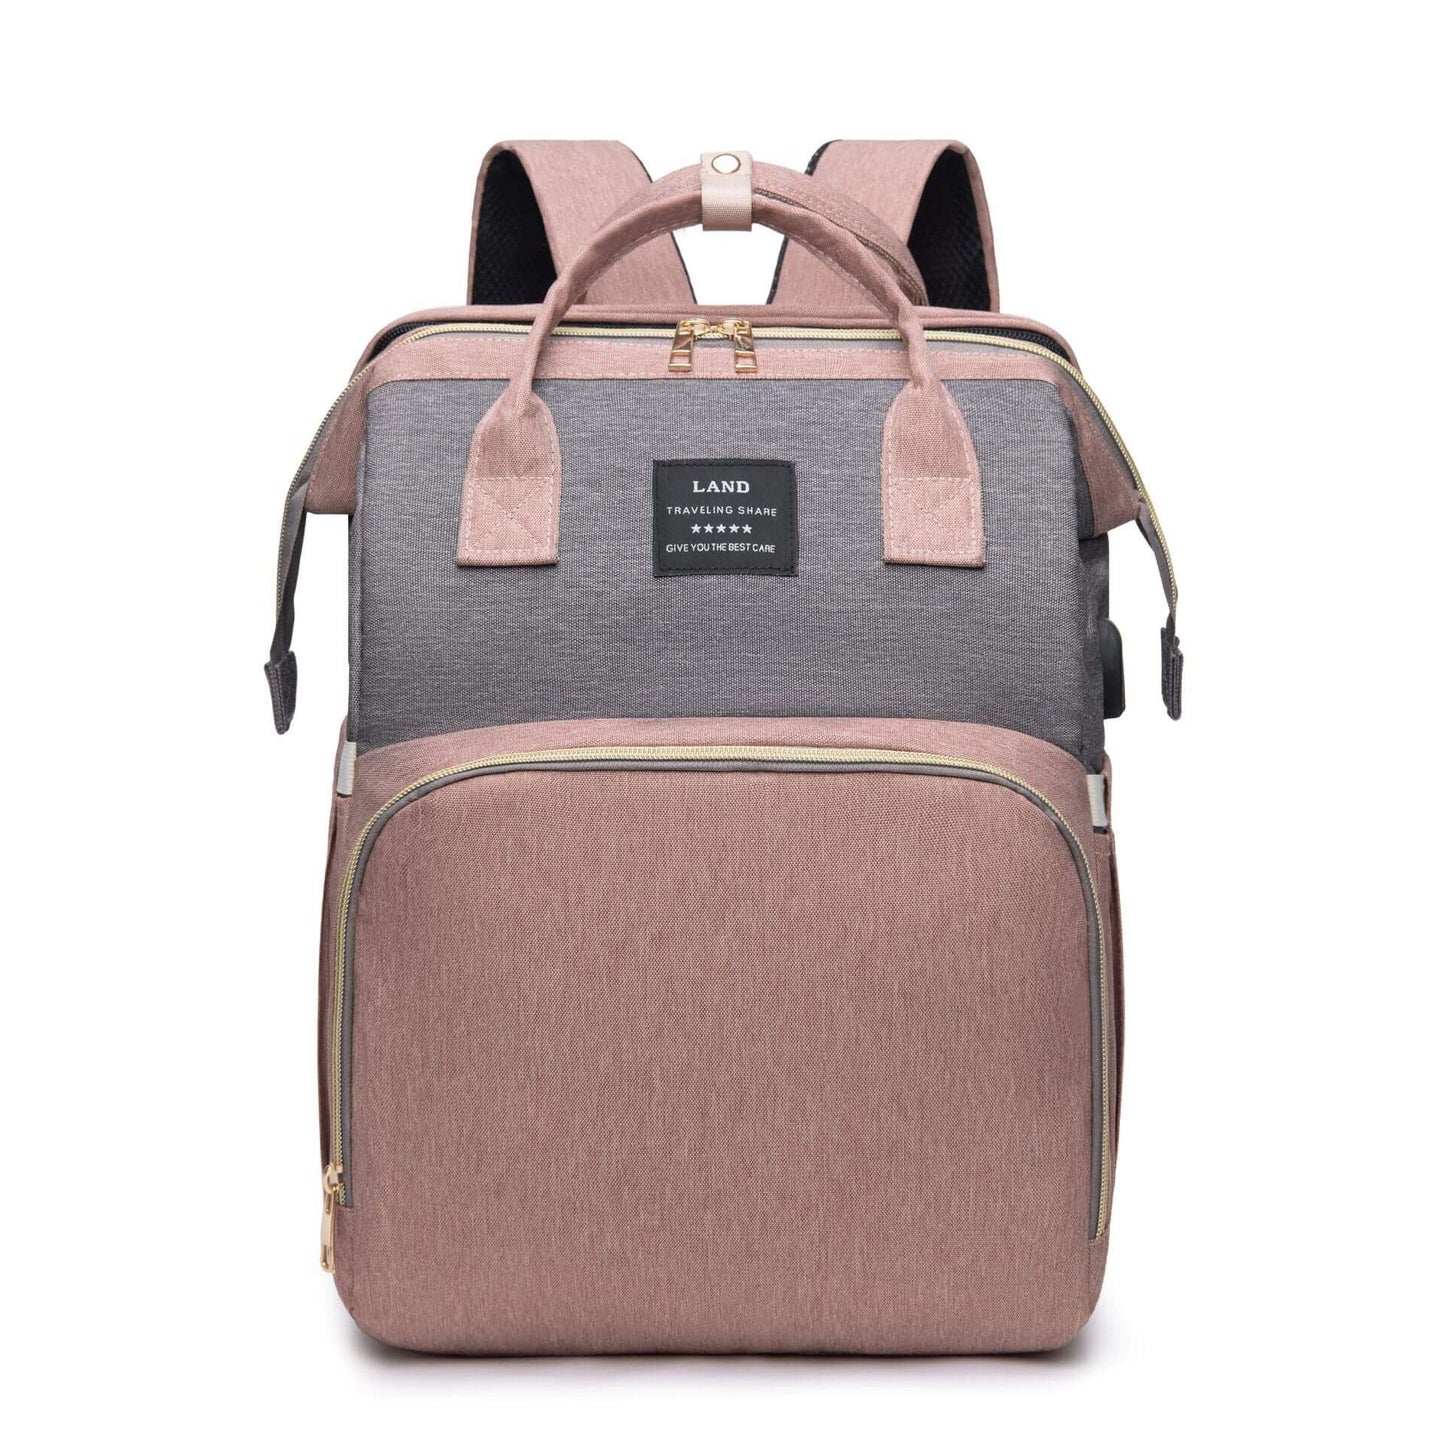 Crib backpack in color pink gray